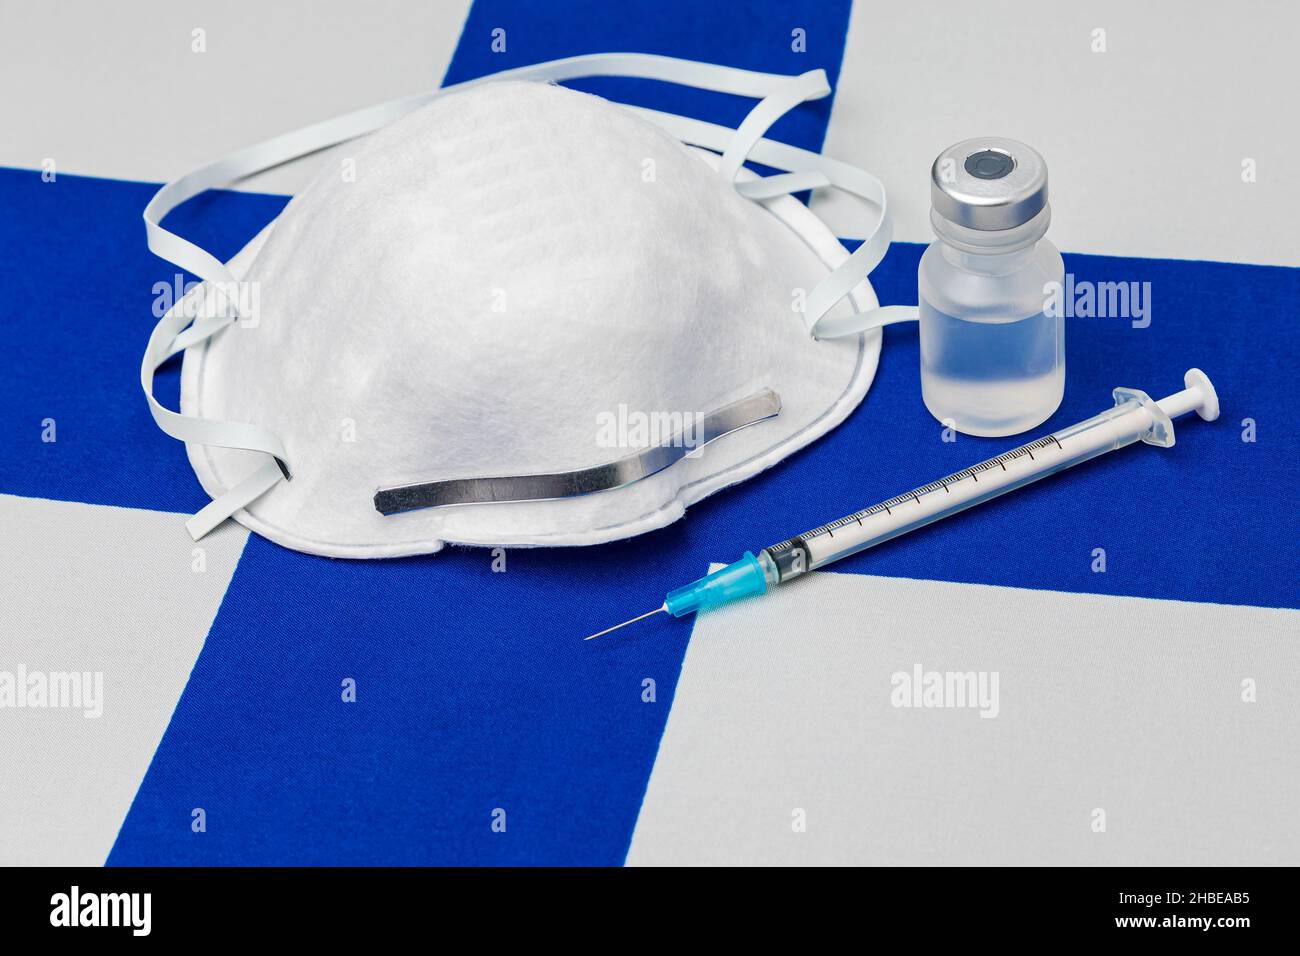 Finland flag, n95 face mask, needle syringe and vial. Concept of Covid-19 coronavirus vaccine distribution, supply shortage and healthcare crisis Stock Photo